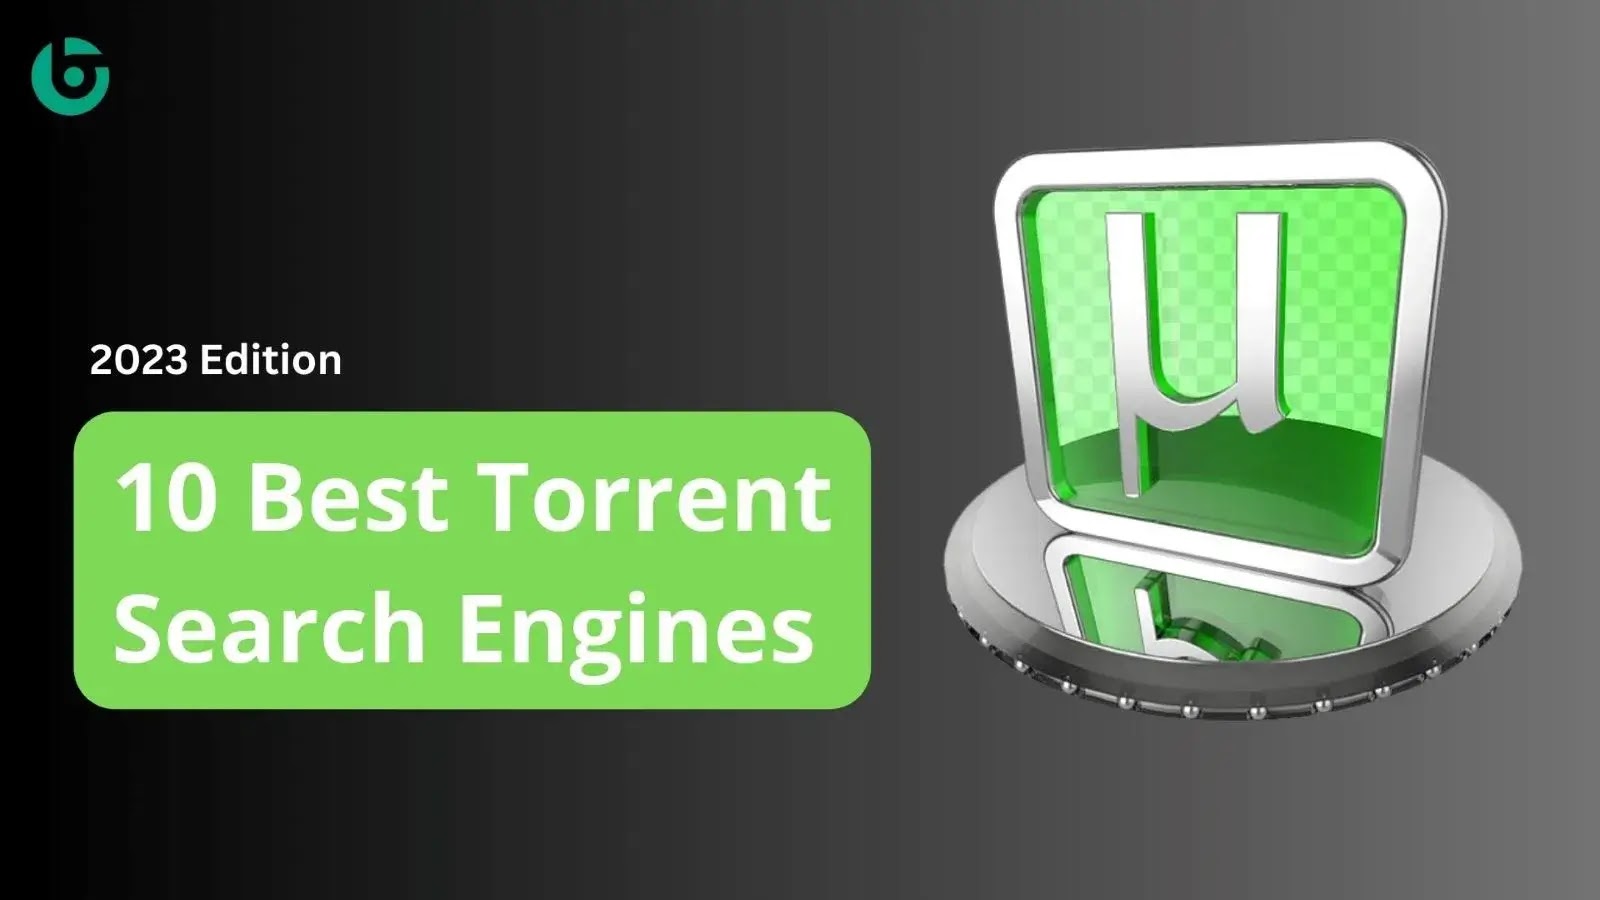 The 10 Best Torrent Sites in 2023 (That Actually Work)